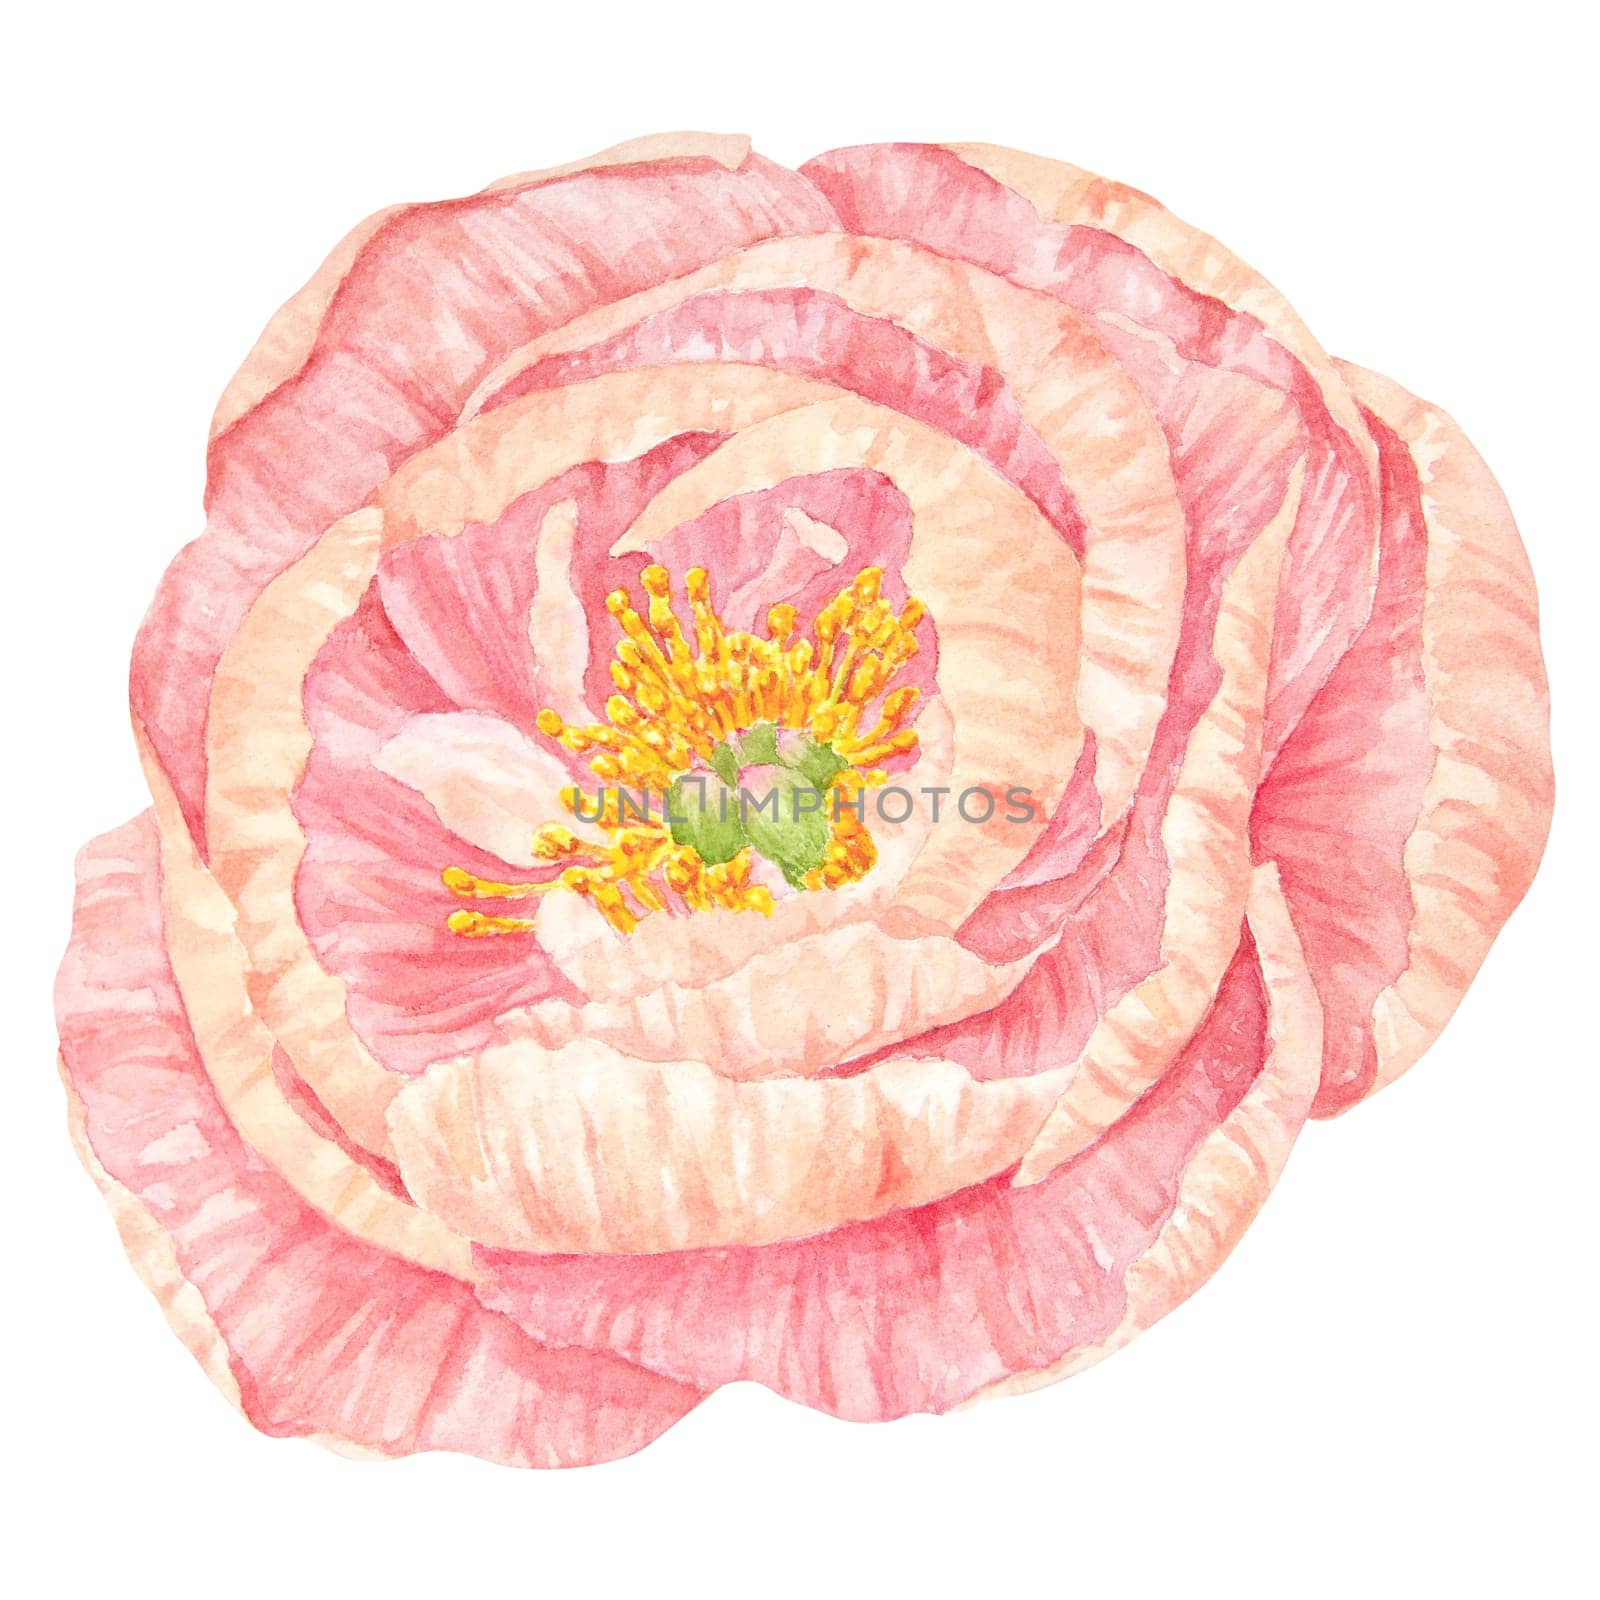 Peach peony watercolor hand drawn painting. Realistic flower clipart, floral arrangement. Chinese national symbol illustration. Perfect for card design, wedding invitation, prints, textile, packing by florainlove_art